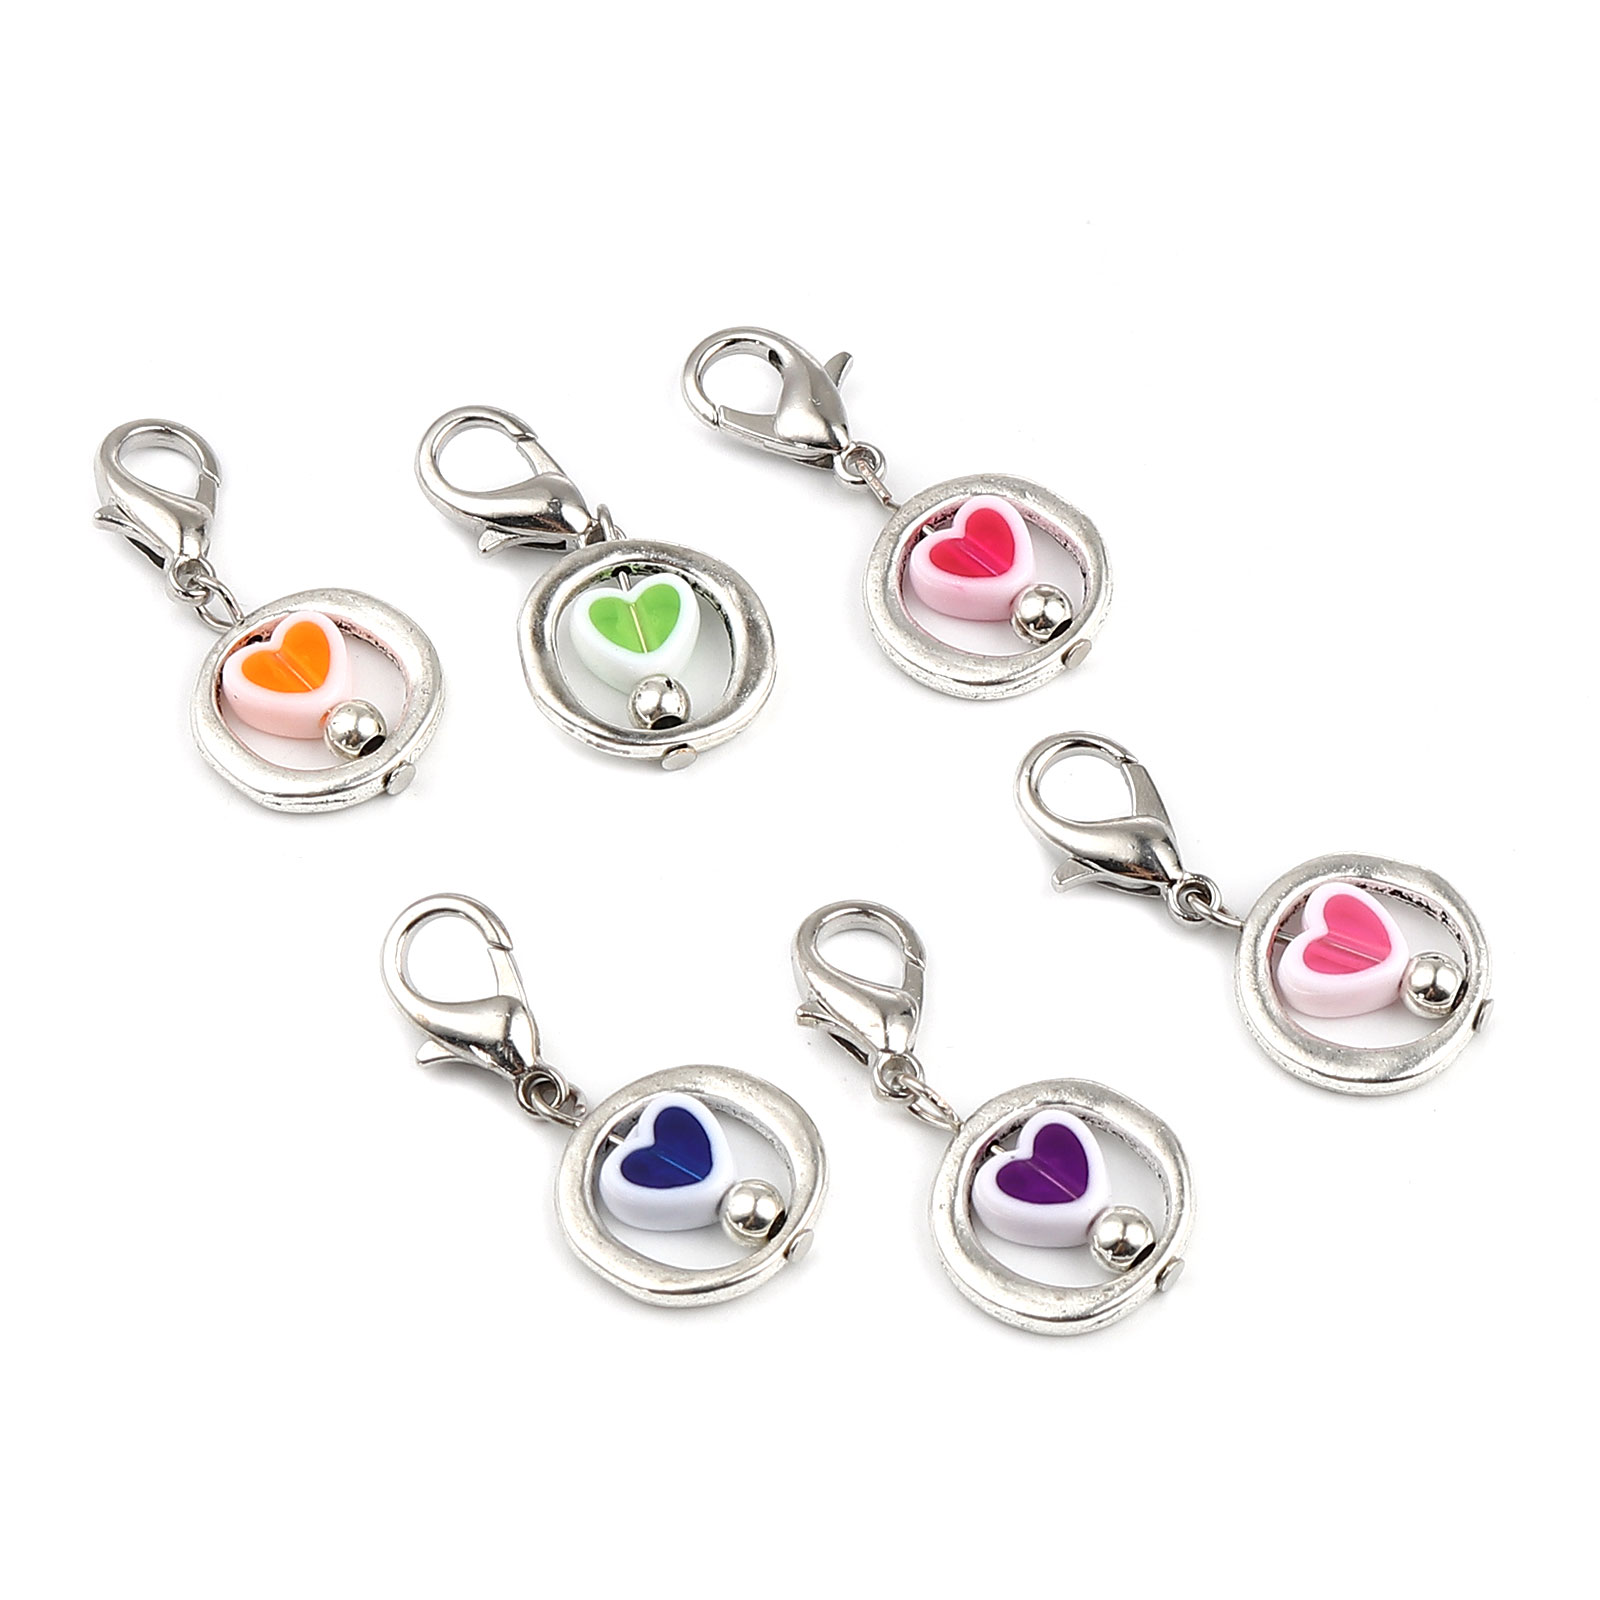 Picture of Zinc Based Alloy & Acrylic Knitting Stitch Markers Circle Ring Silver Tone At Random Color Heart 35mm x 16mm, 12 PCs